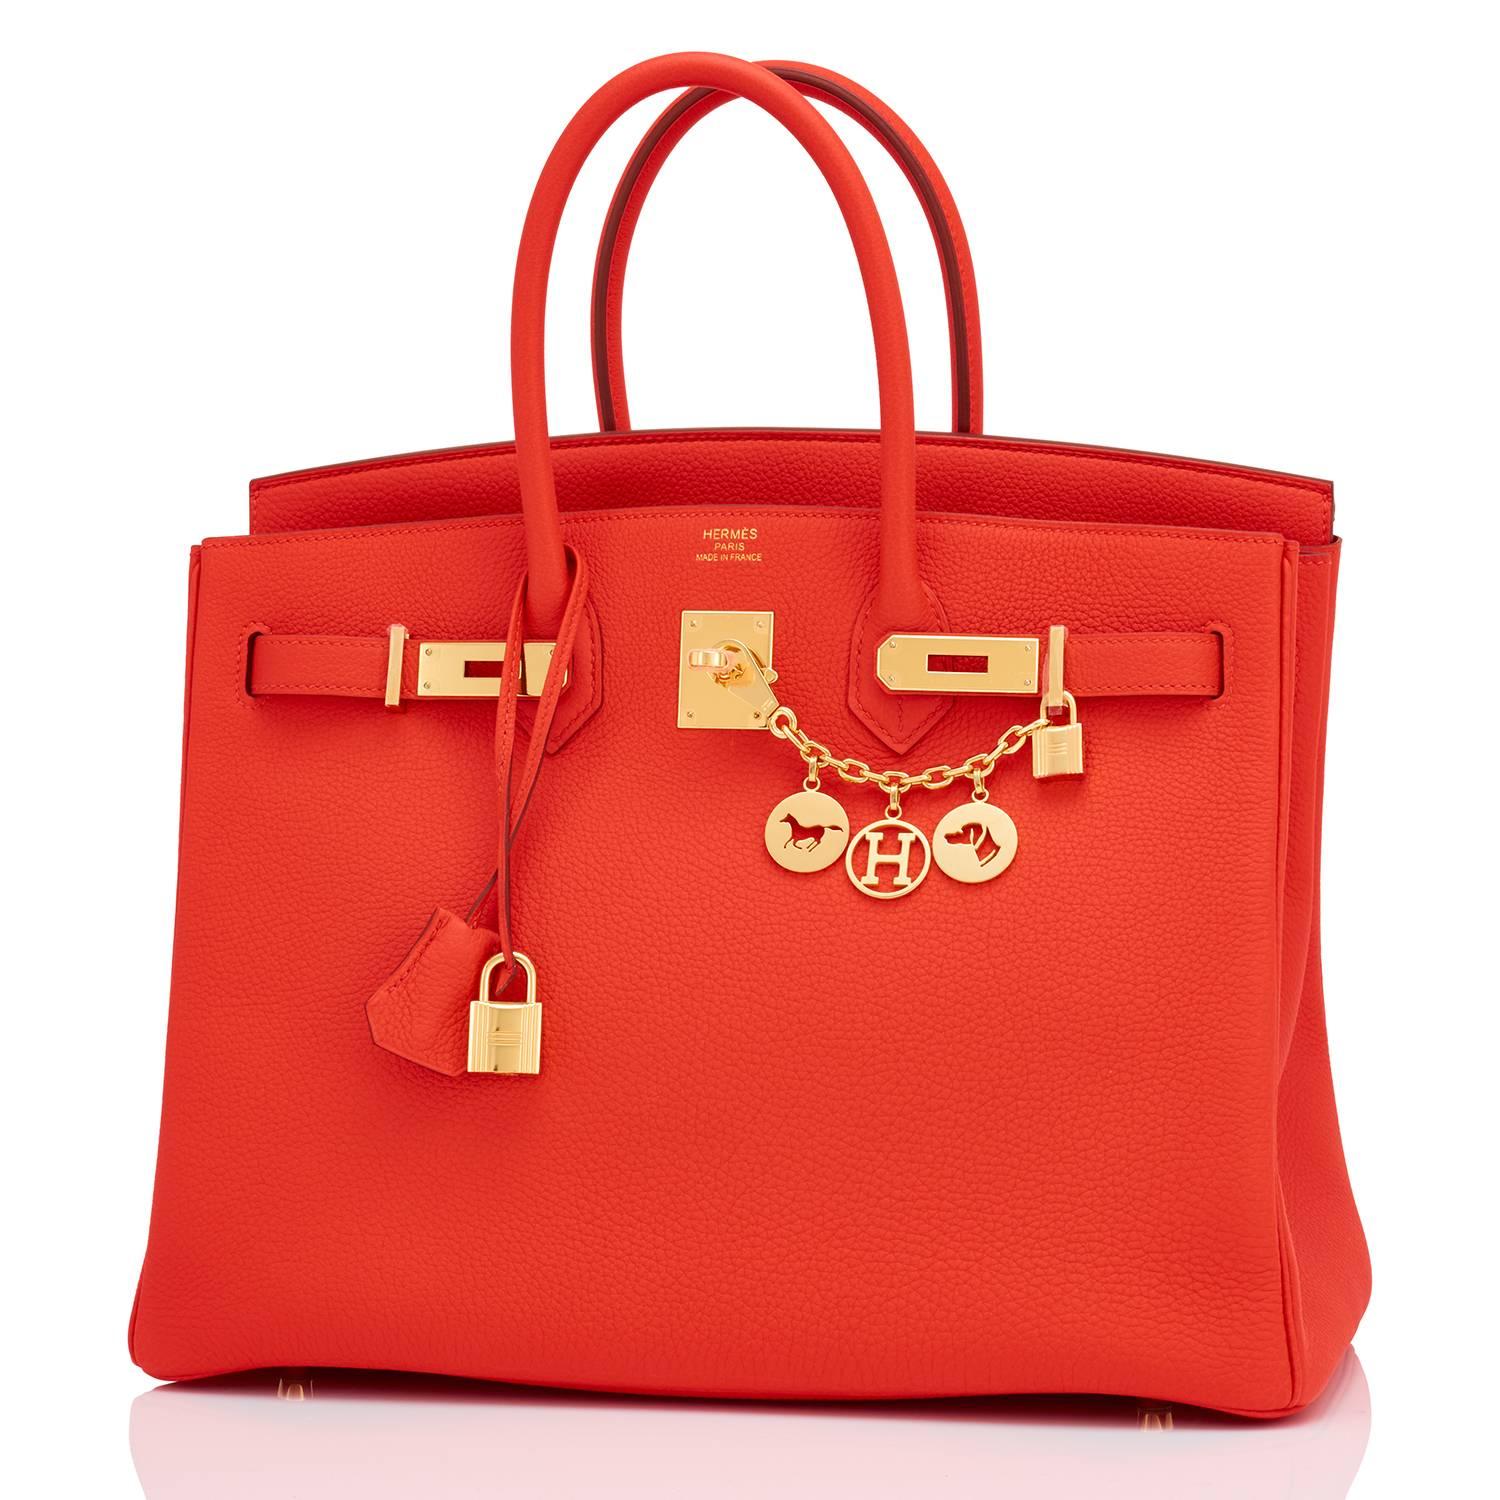 Hermes Capucine Red-Orange 35cm Togo Birkin Gold GHW Tote Bag Gorgeous!
Brand New in Box. Store fresh. Pristine Condition (with plastic on hardware)
Perfect gift! Comes in full set with lock, keys, clochette, sleeper, raincoat, and orange Hermes